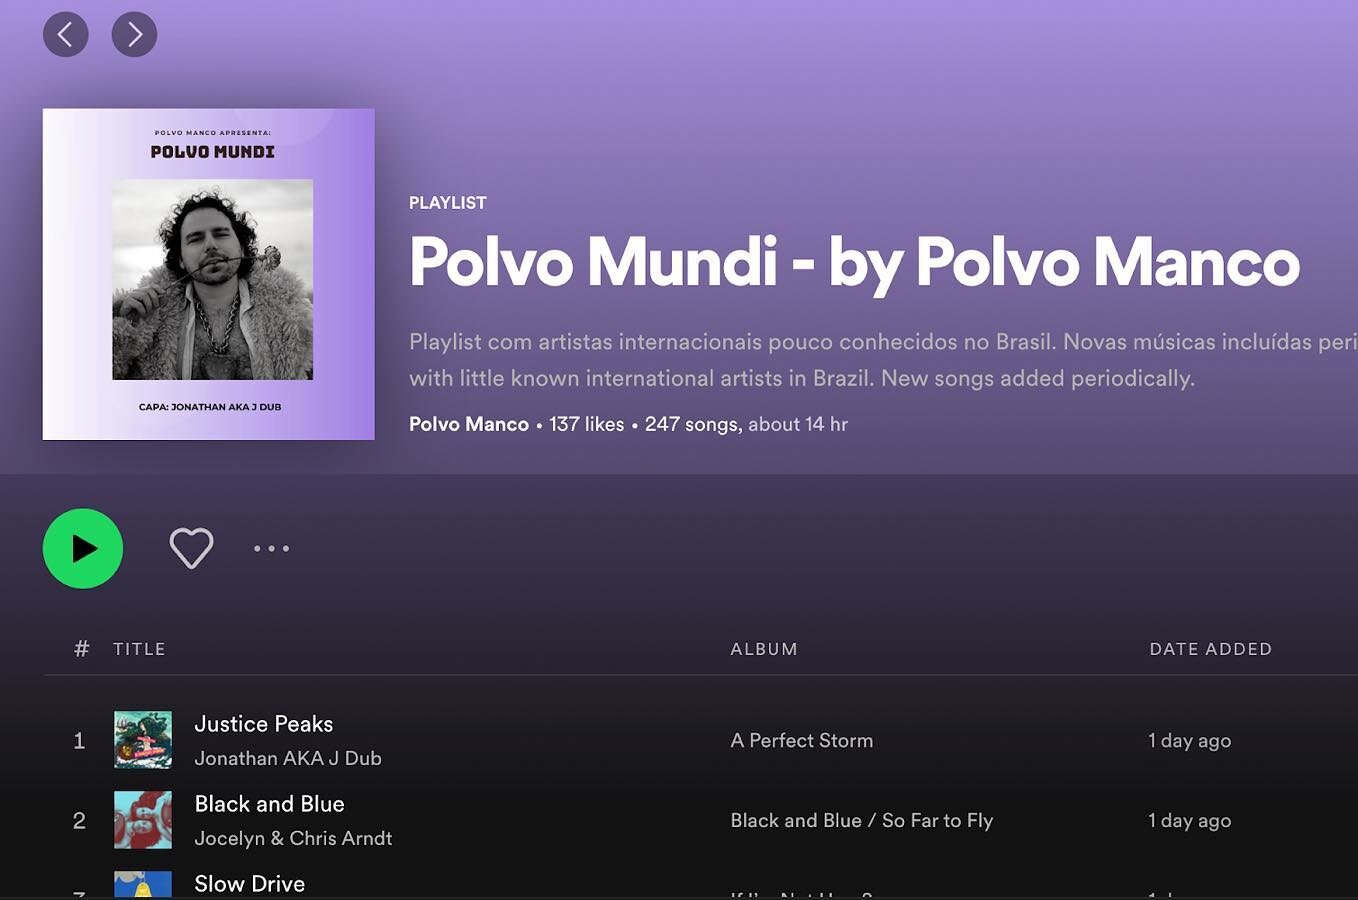 Shout out to Polvo Manco in Brazil for making me the cover of his playlist!
#gocheckitout 

#brazilmusic #musicpromo #selfproduced #independantartist